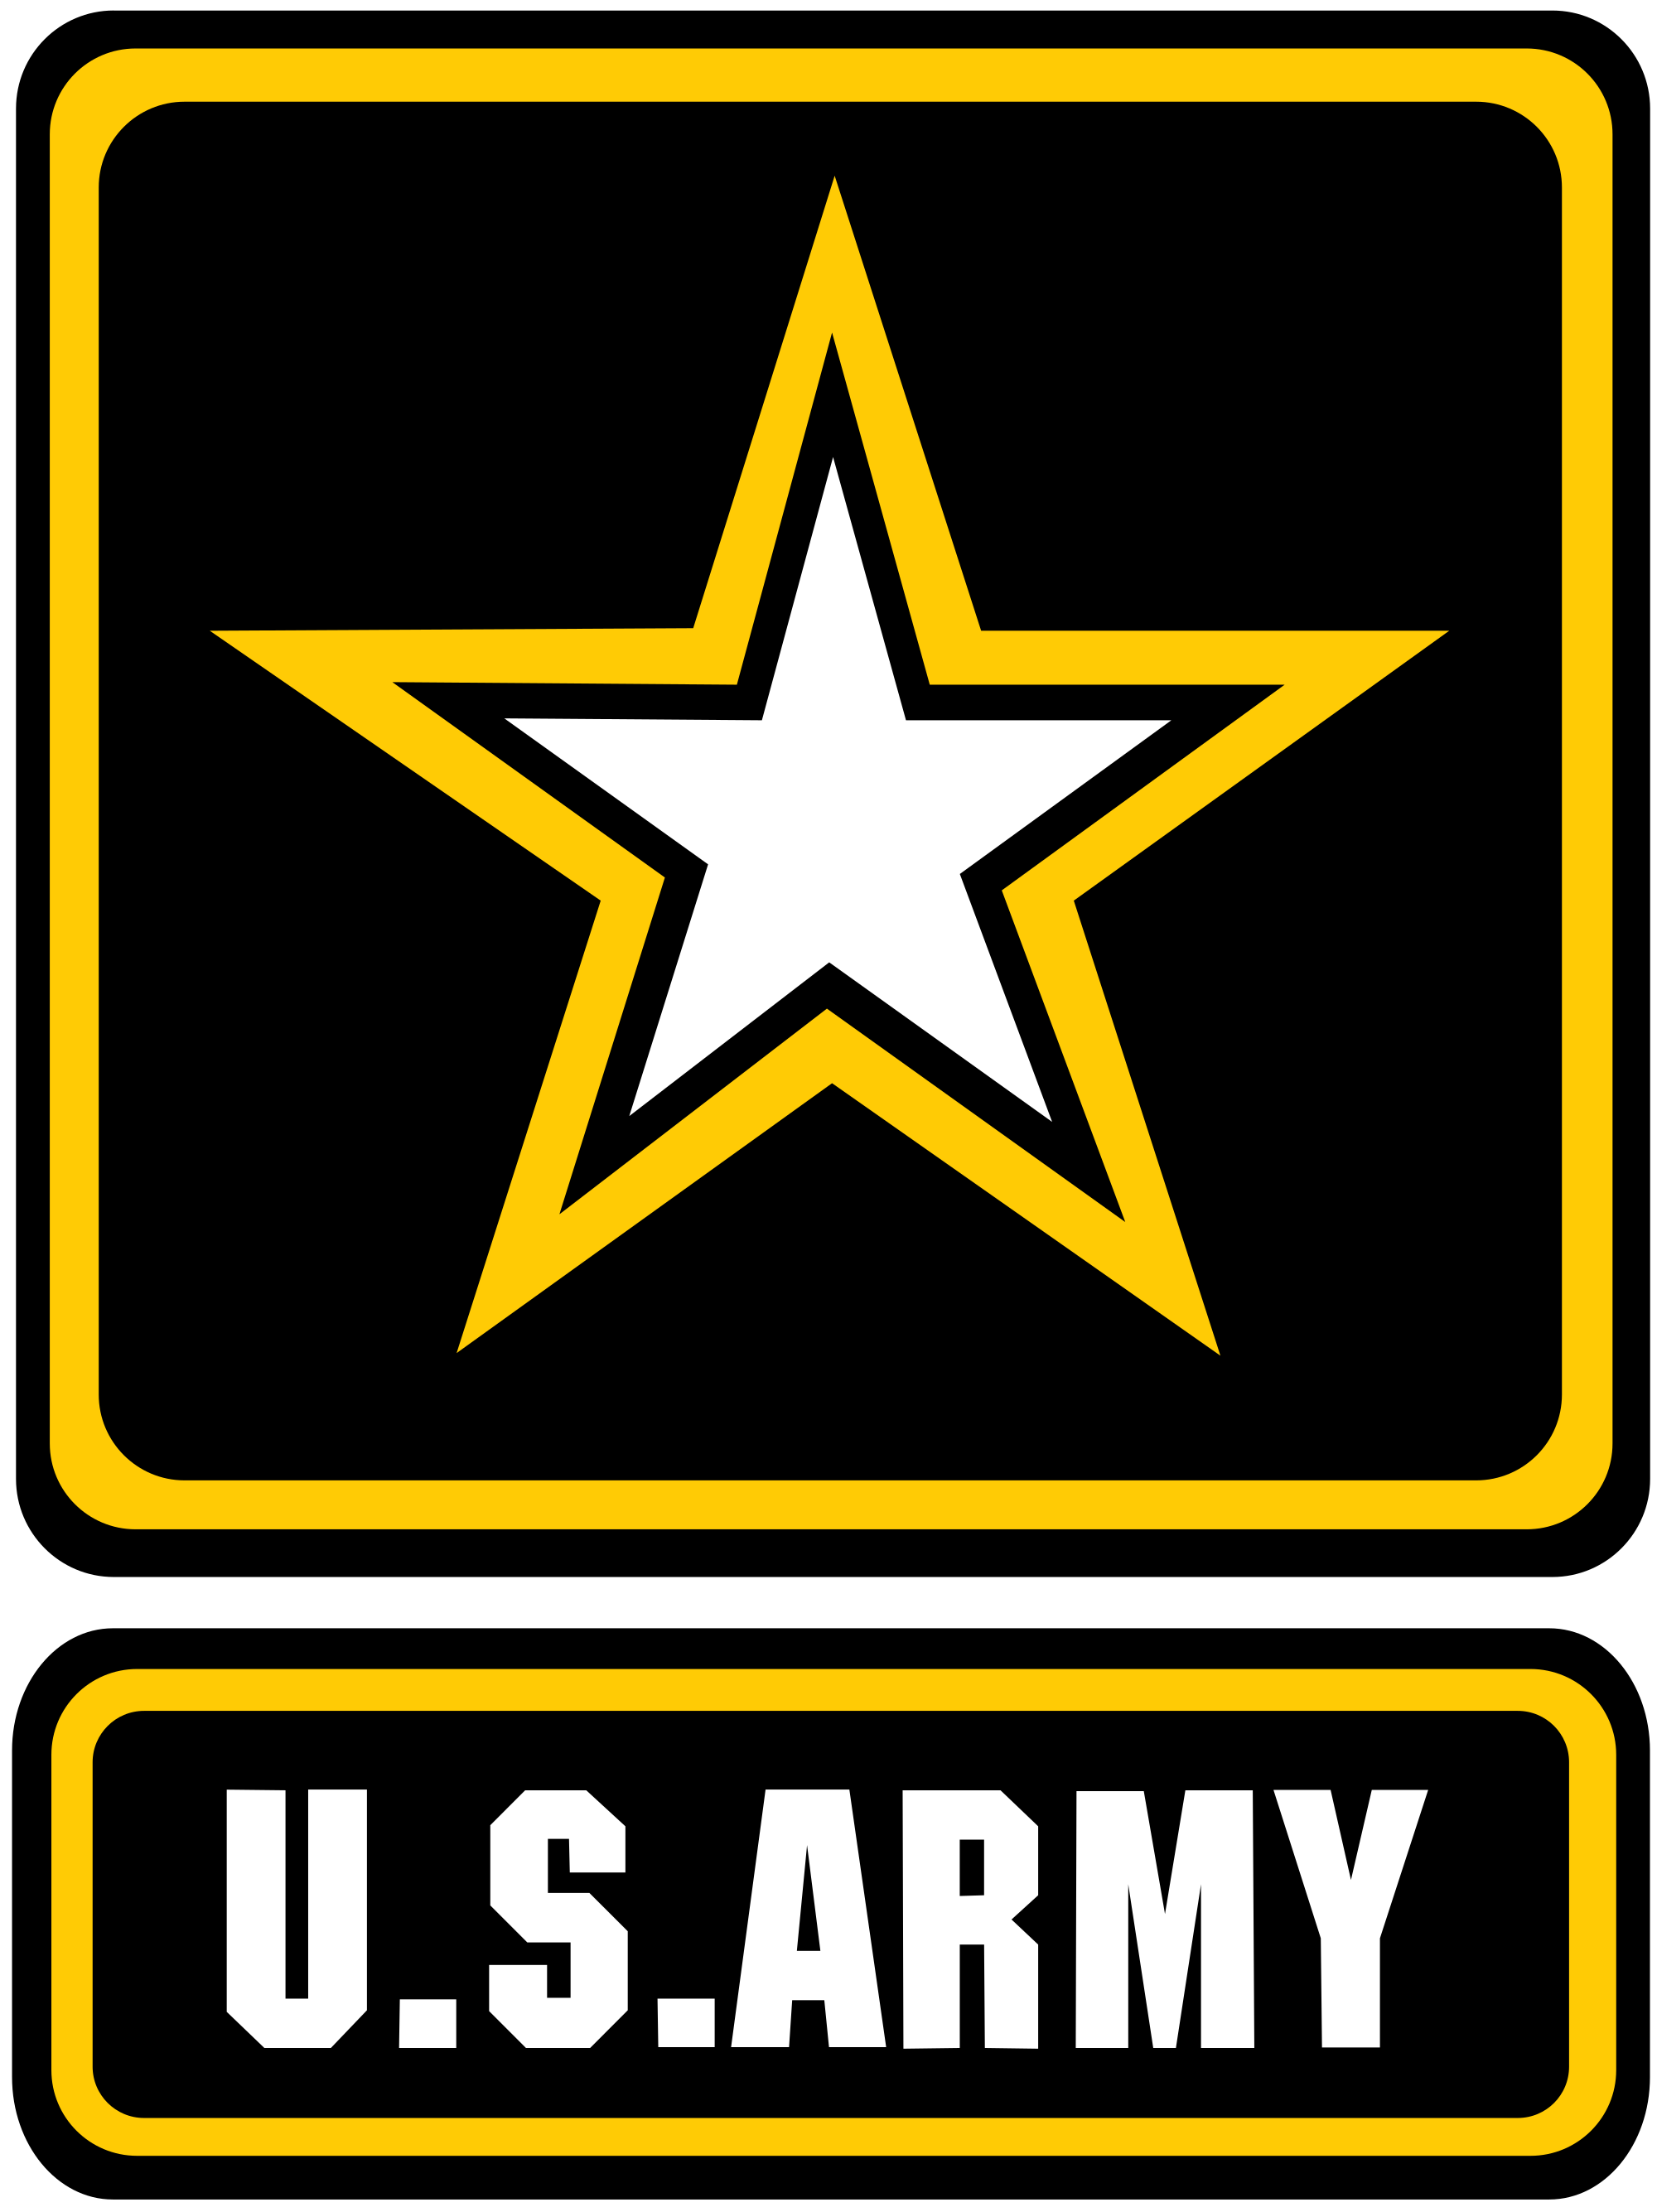 Logo Army Strong Png Transparent Logo Army Strongpng Images Pluspng